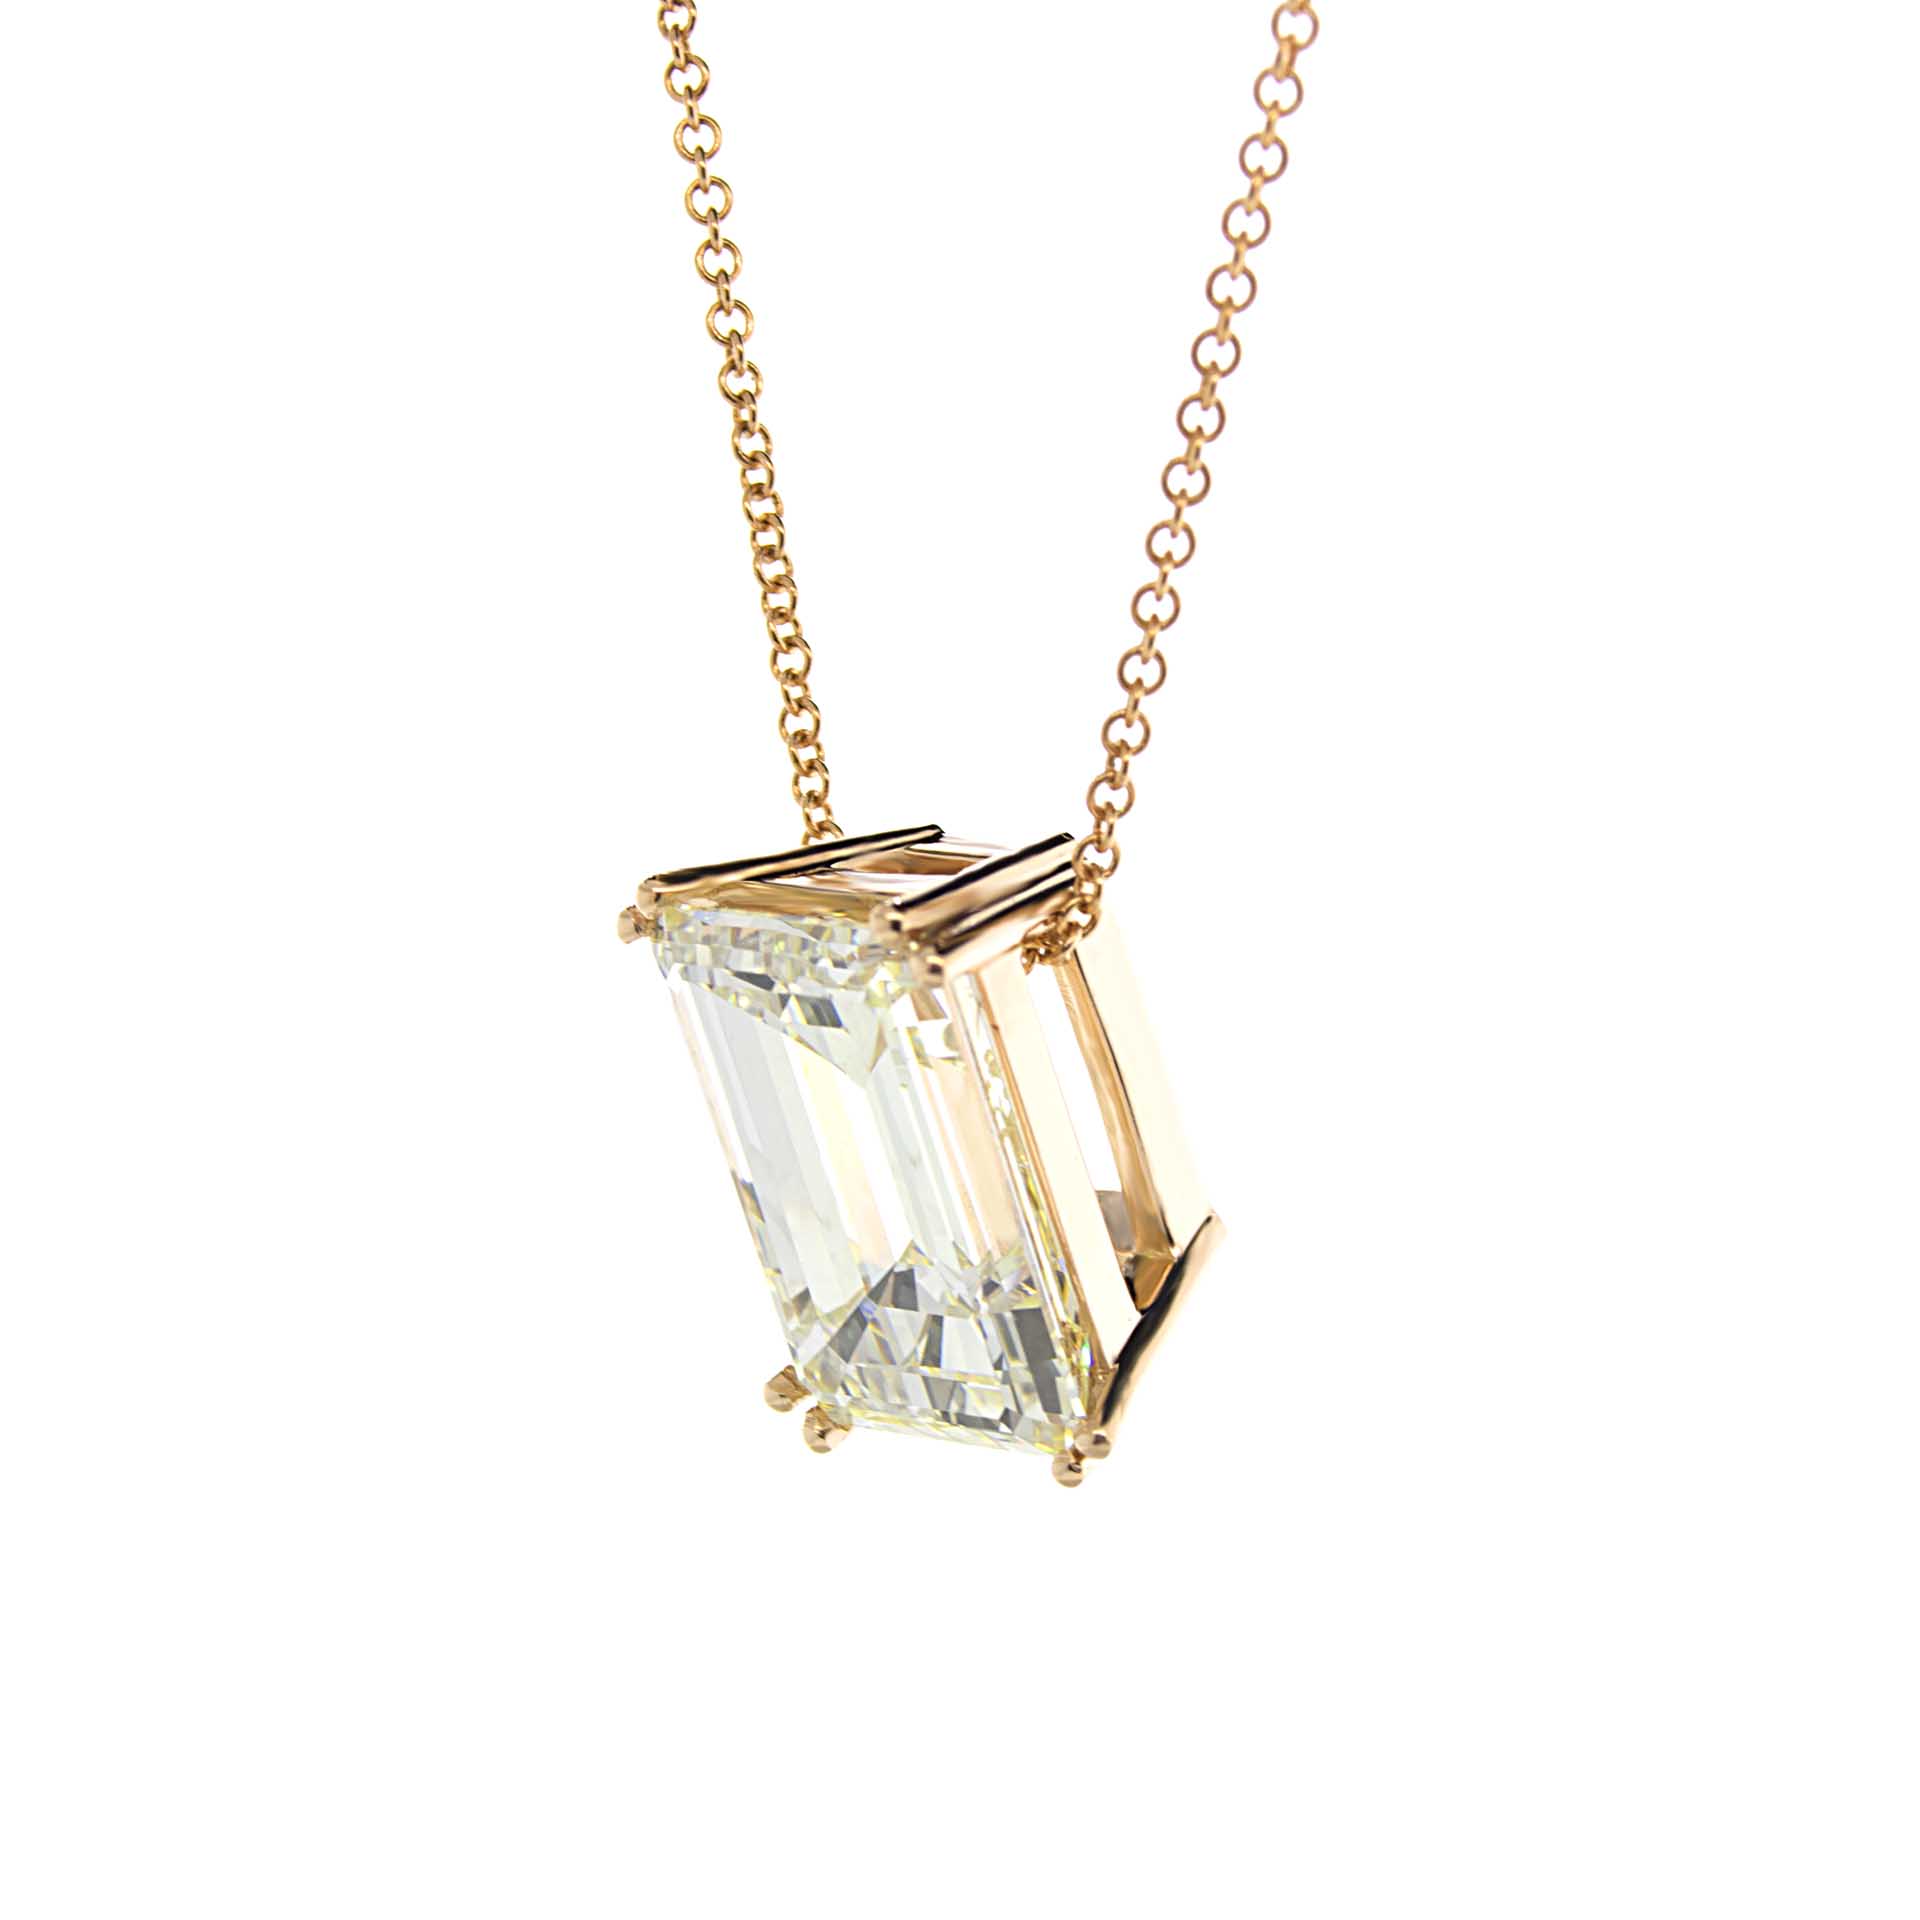 Certified - 2 Carat Emerald Cut Moissanite - Charming Pendant Necklace -  18K Yellow Gold Plating Over Silver - Walmart.com